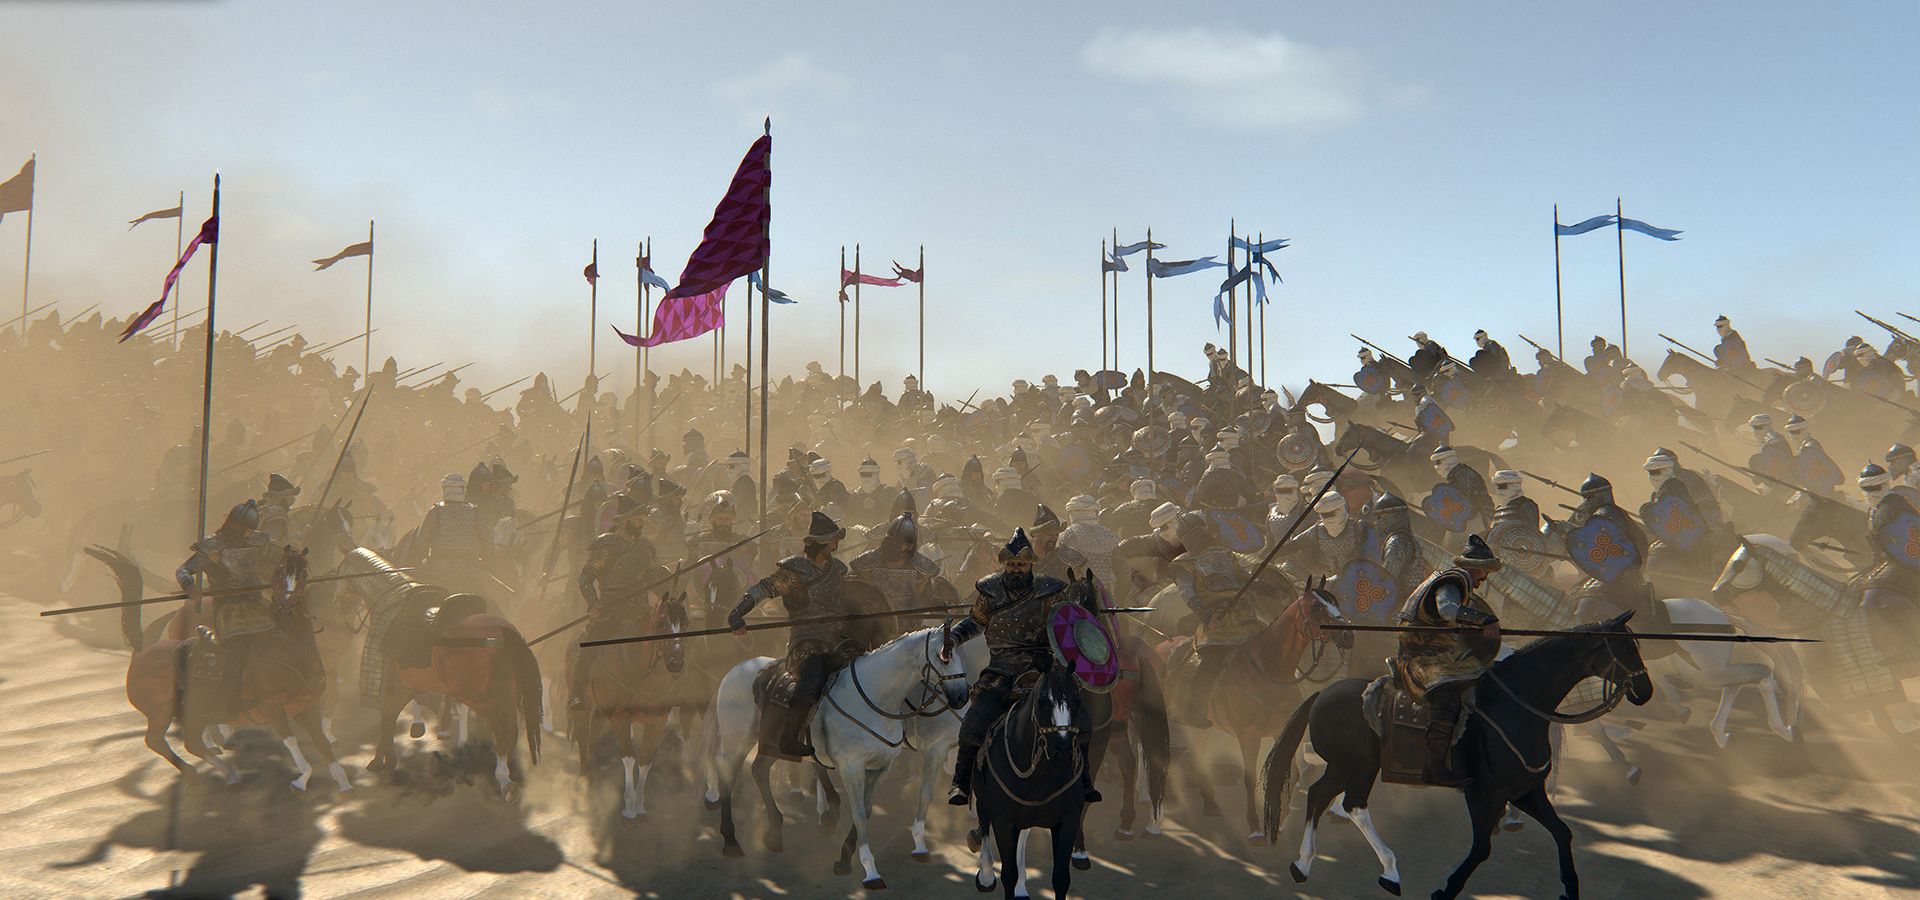 In this article, we are going to be covering Bannerlord Campaign vs Sandbox: What are the differences, so you know what to expect when you jump into one of them.